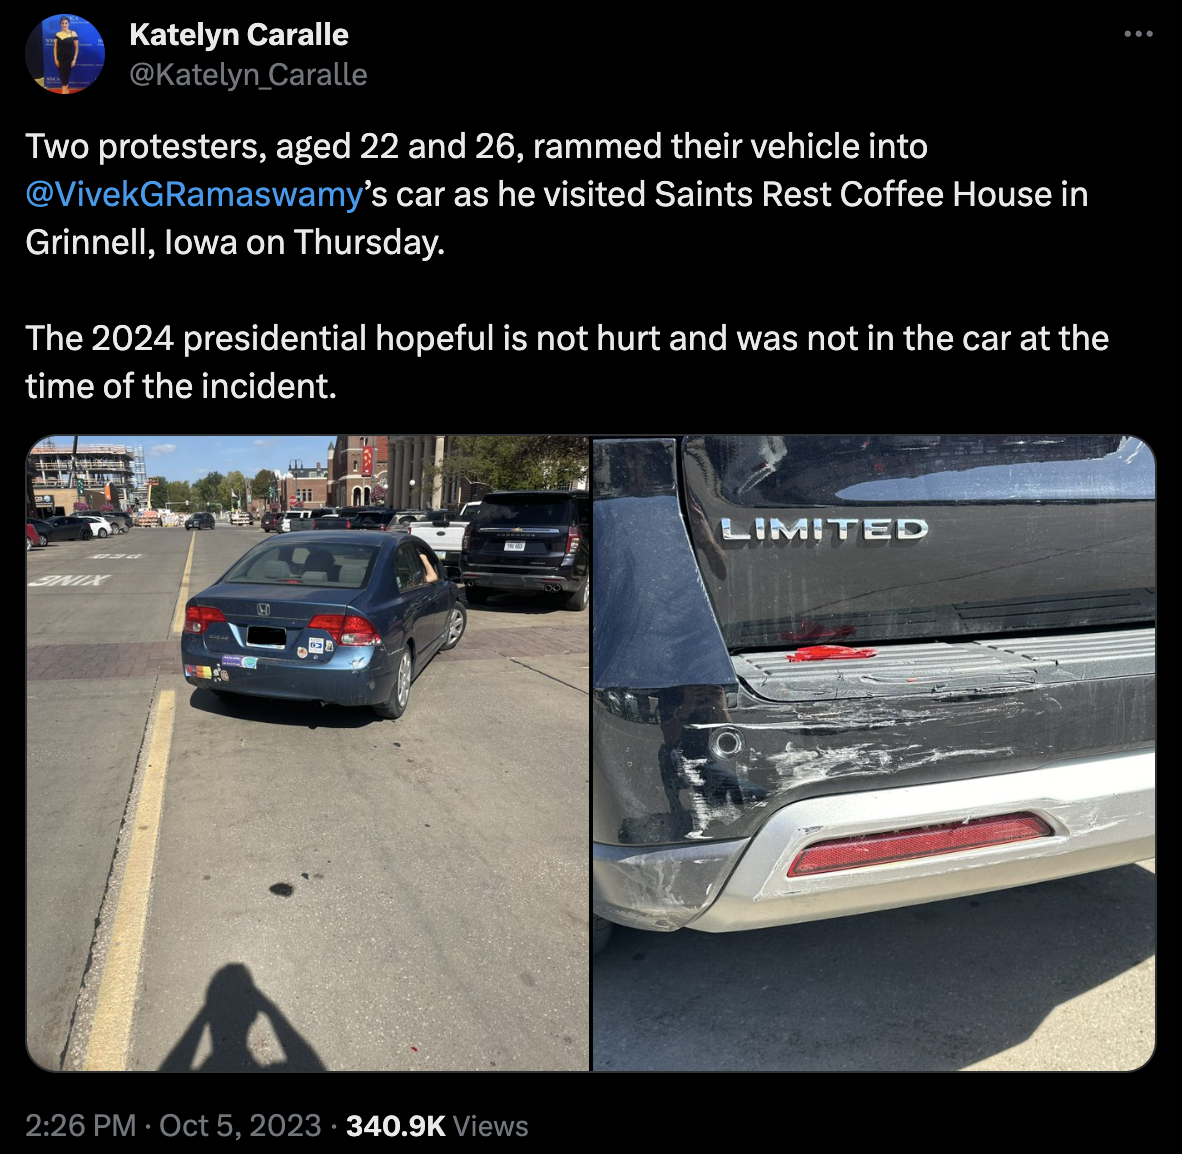 An X post with photos of the car involved in the accident (left) and the damage to Ramaswamys campaign vehicle (right).